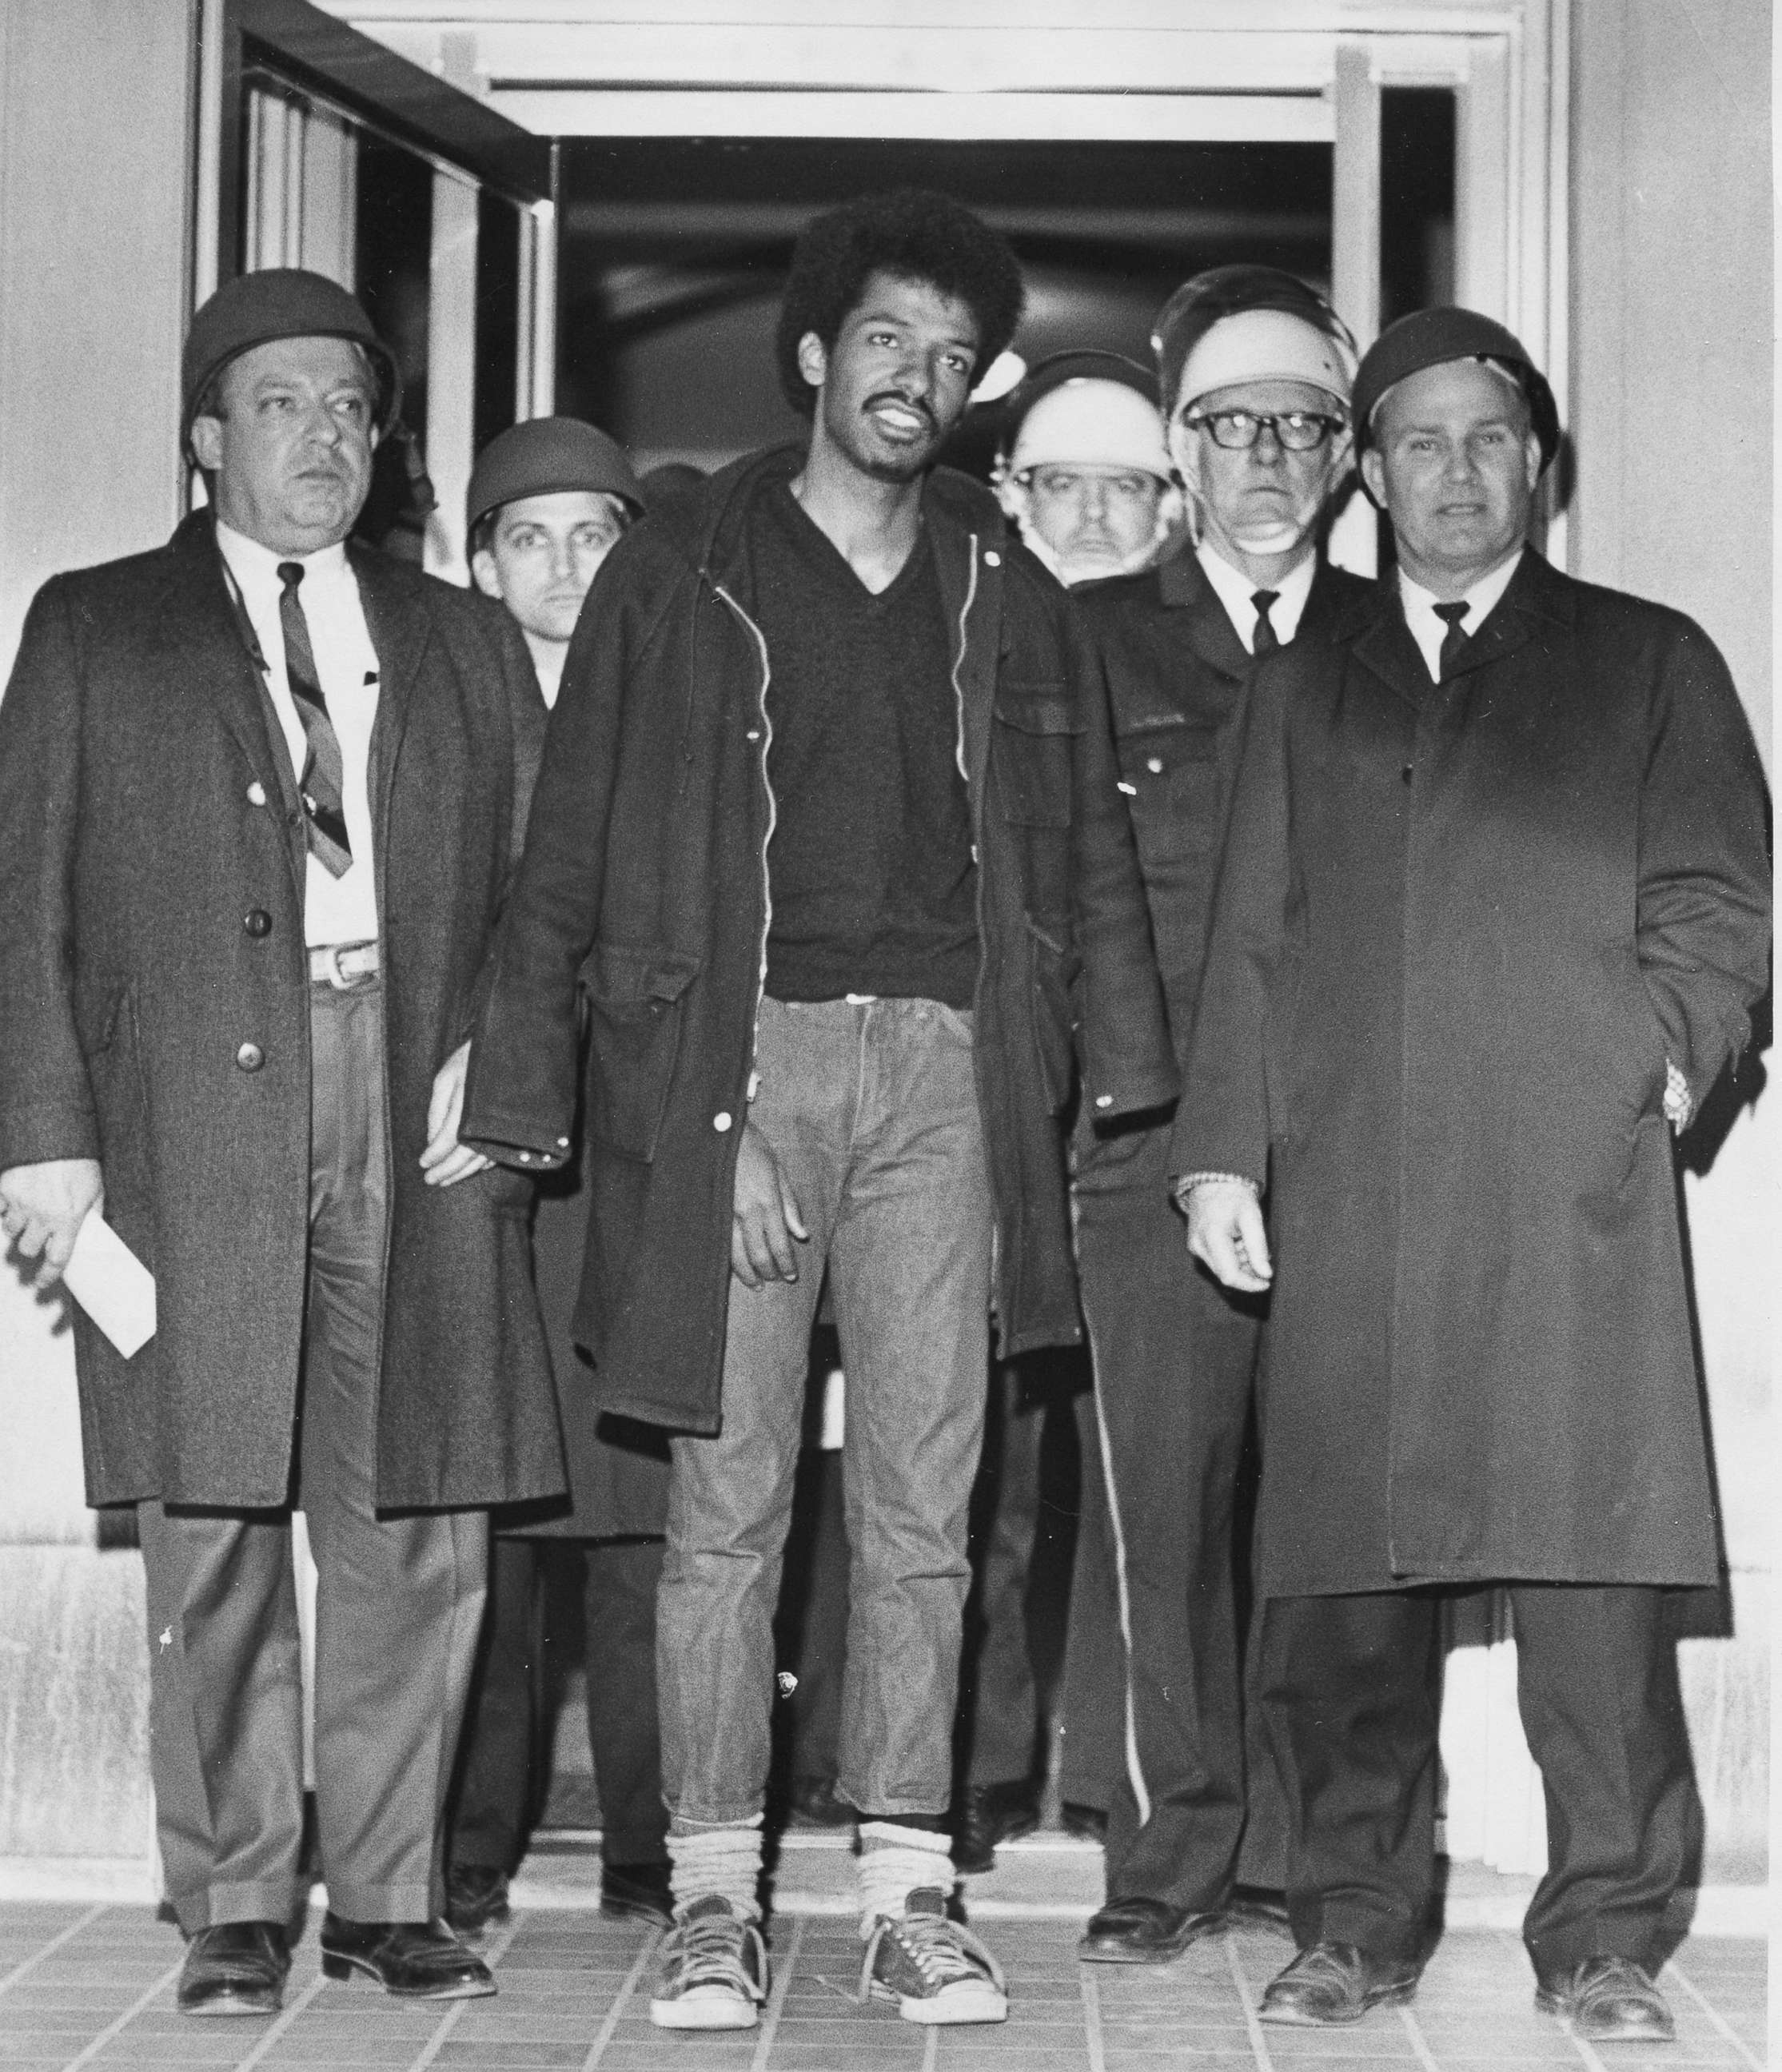 PHOTO: Cleveland Sellers, center, stands with officers after his arrest the previous night in Orangeburg, S.C., where three people were killed and others wounded, Feb. 9, 1968.